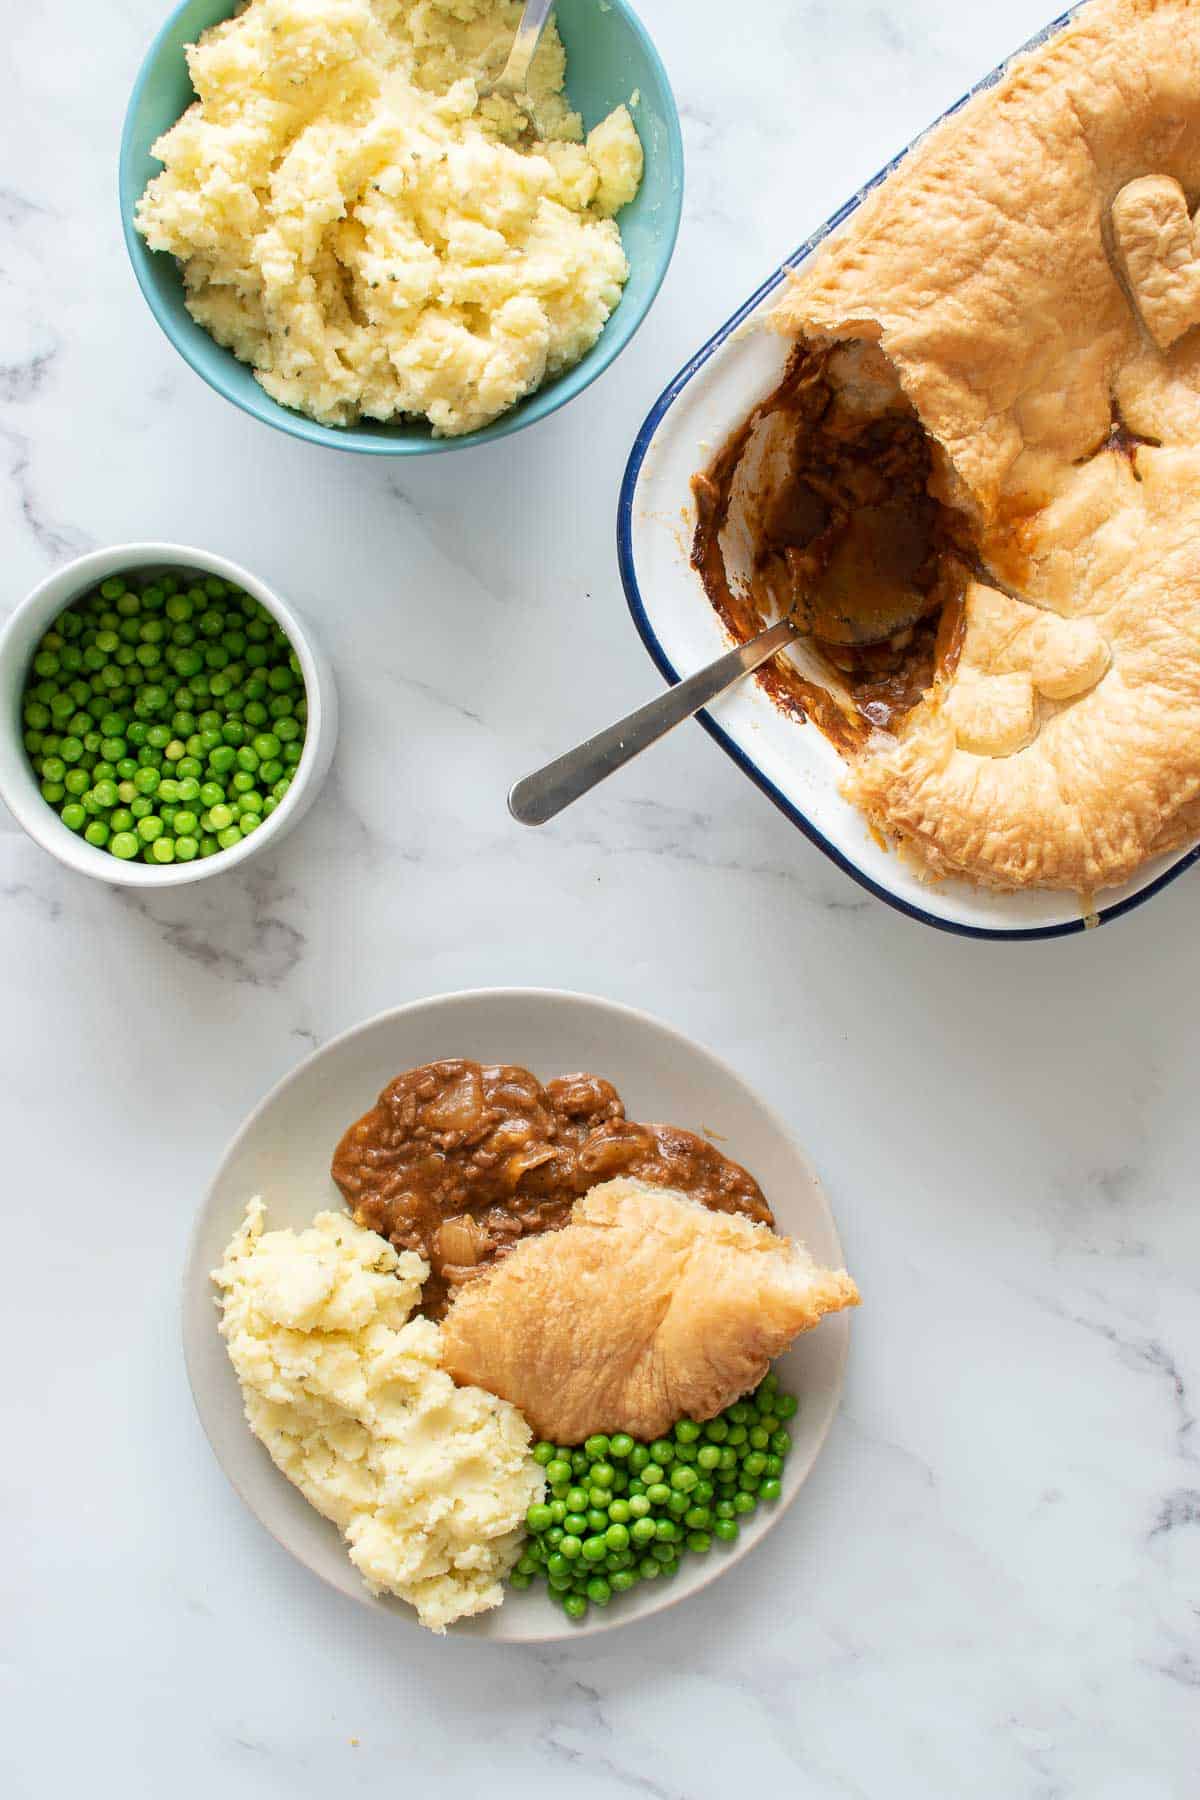 A table with beef pie, mashed potaotes, and peas, and a plate with a full serving.